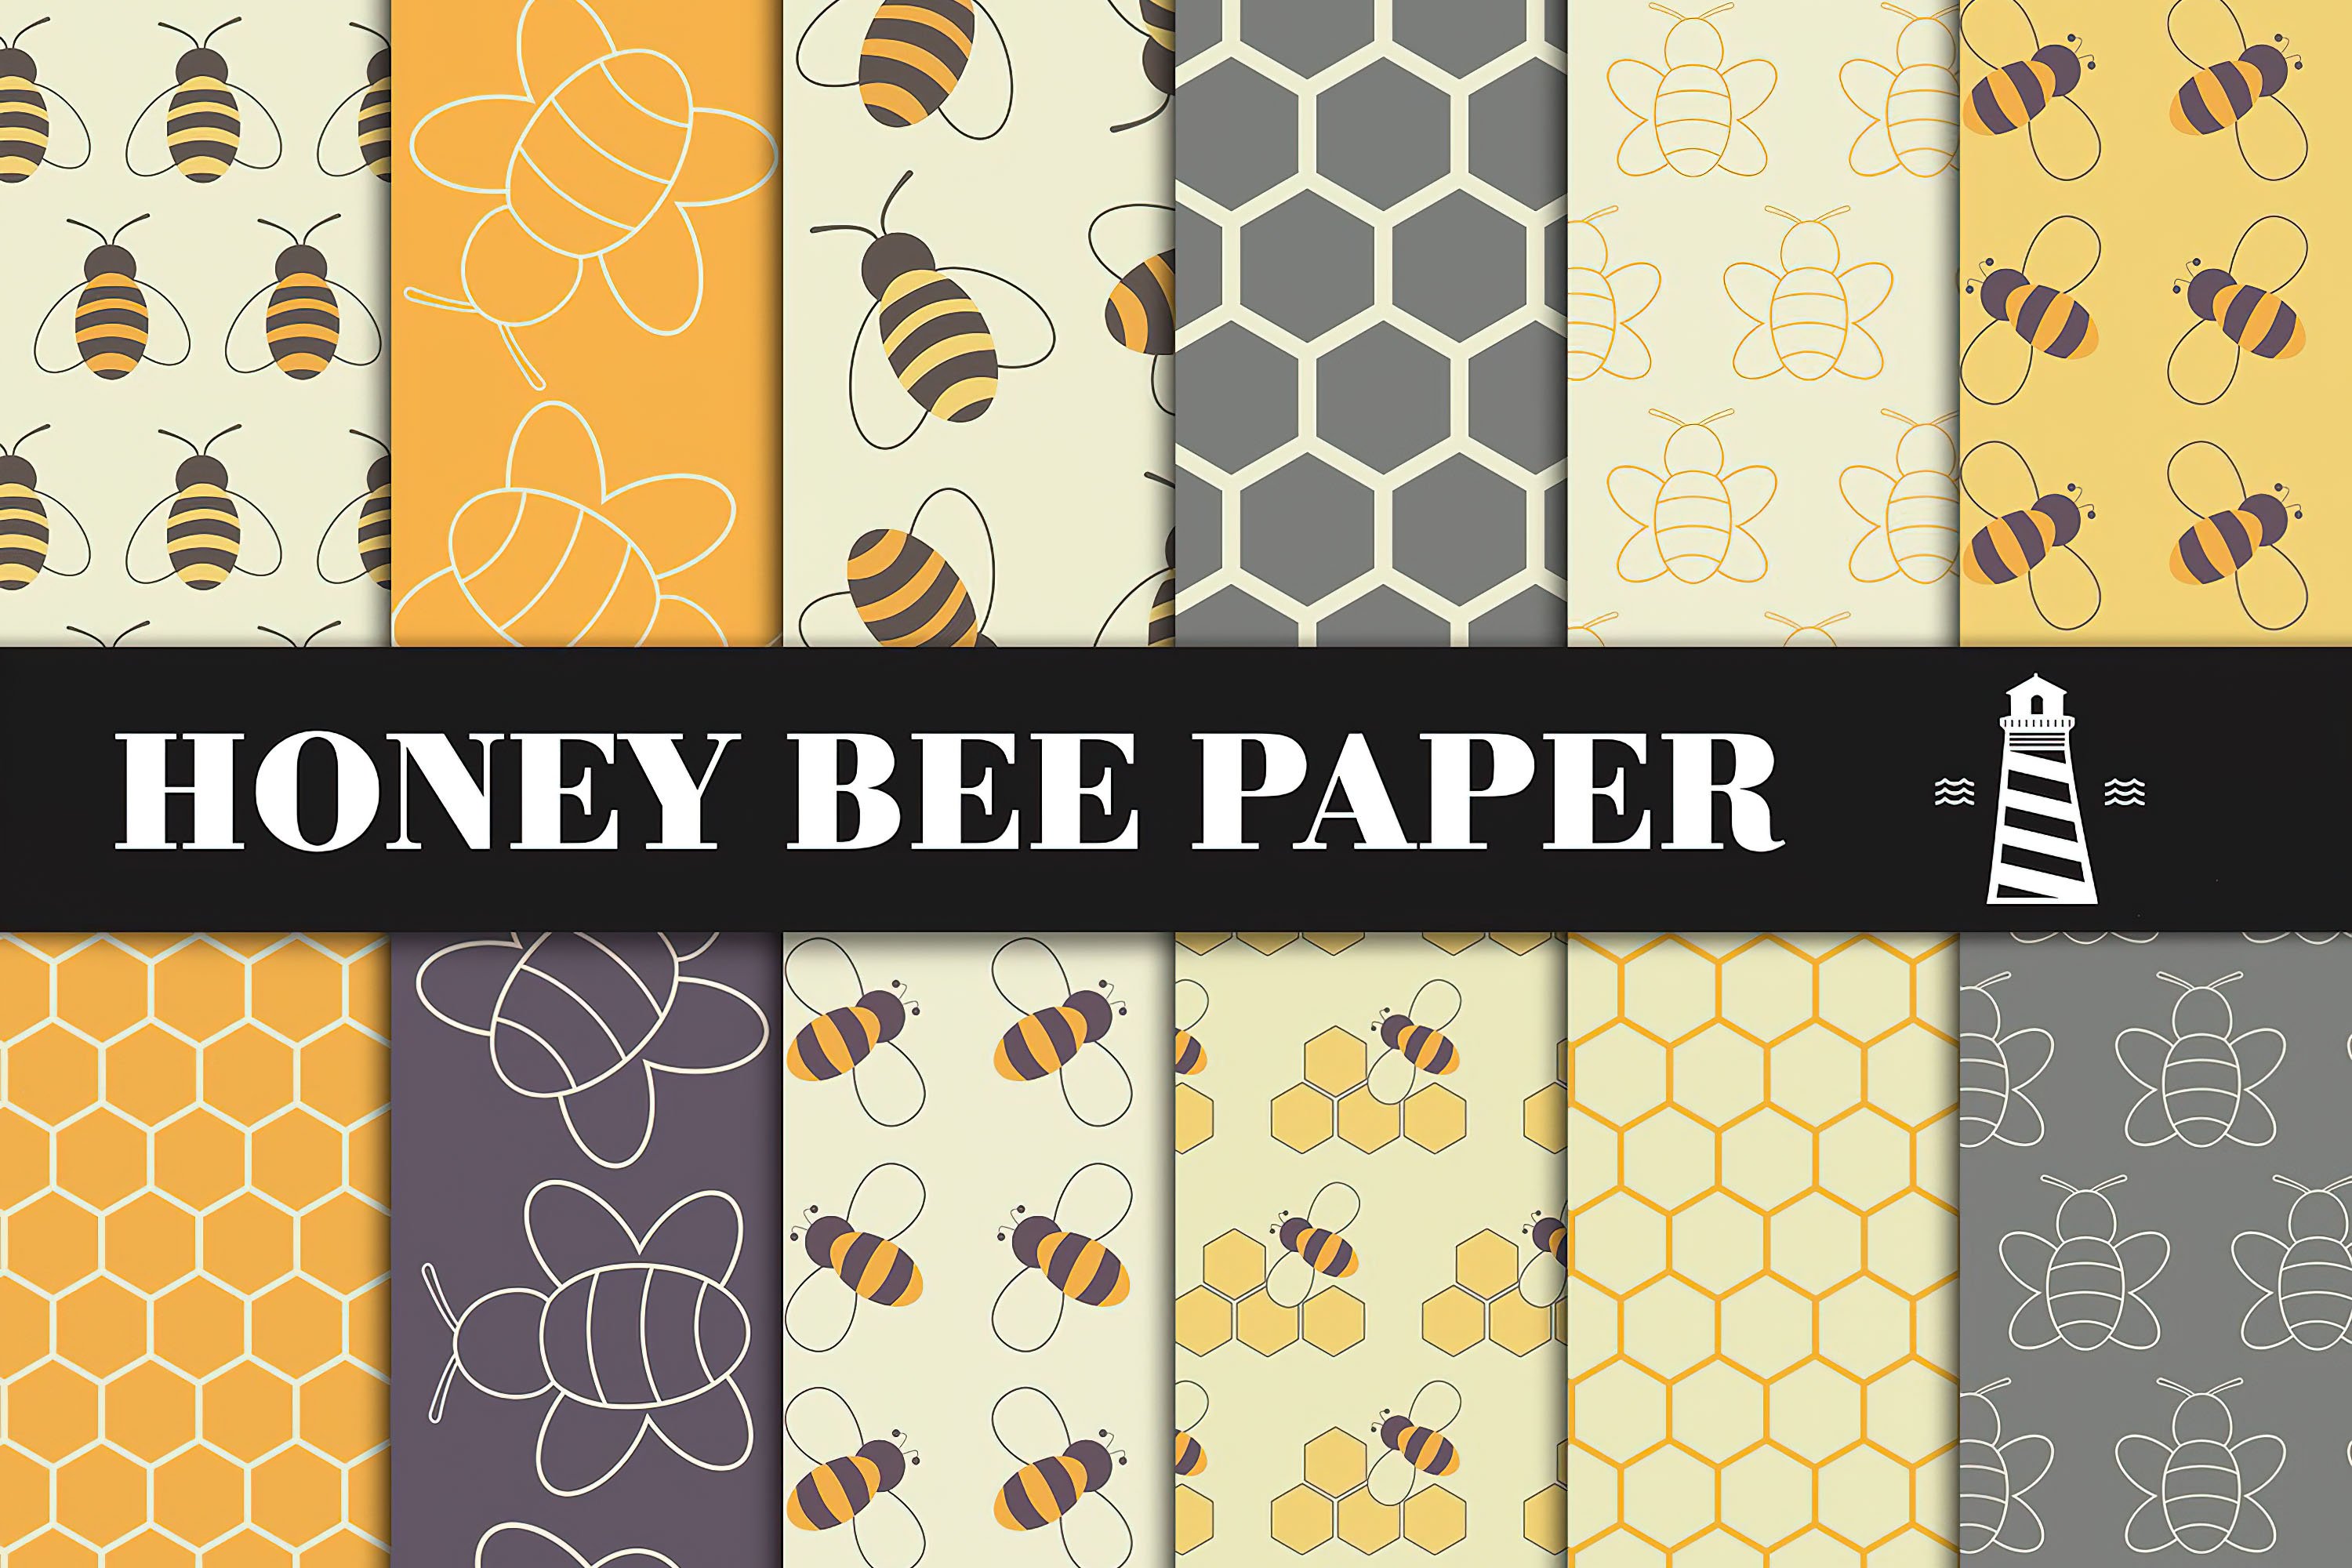 Honey Bee Patterns cover image.